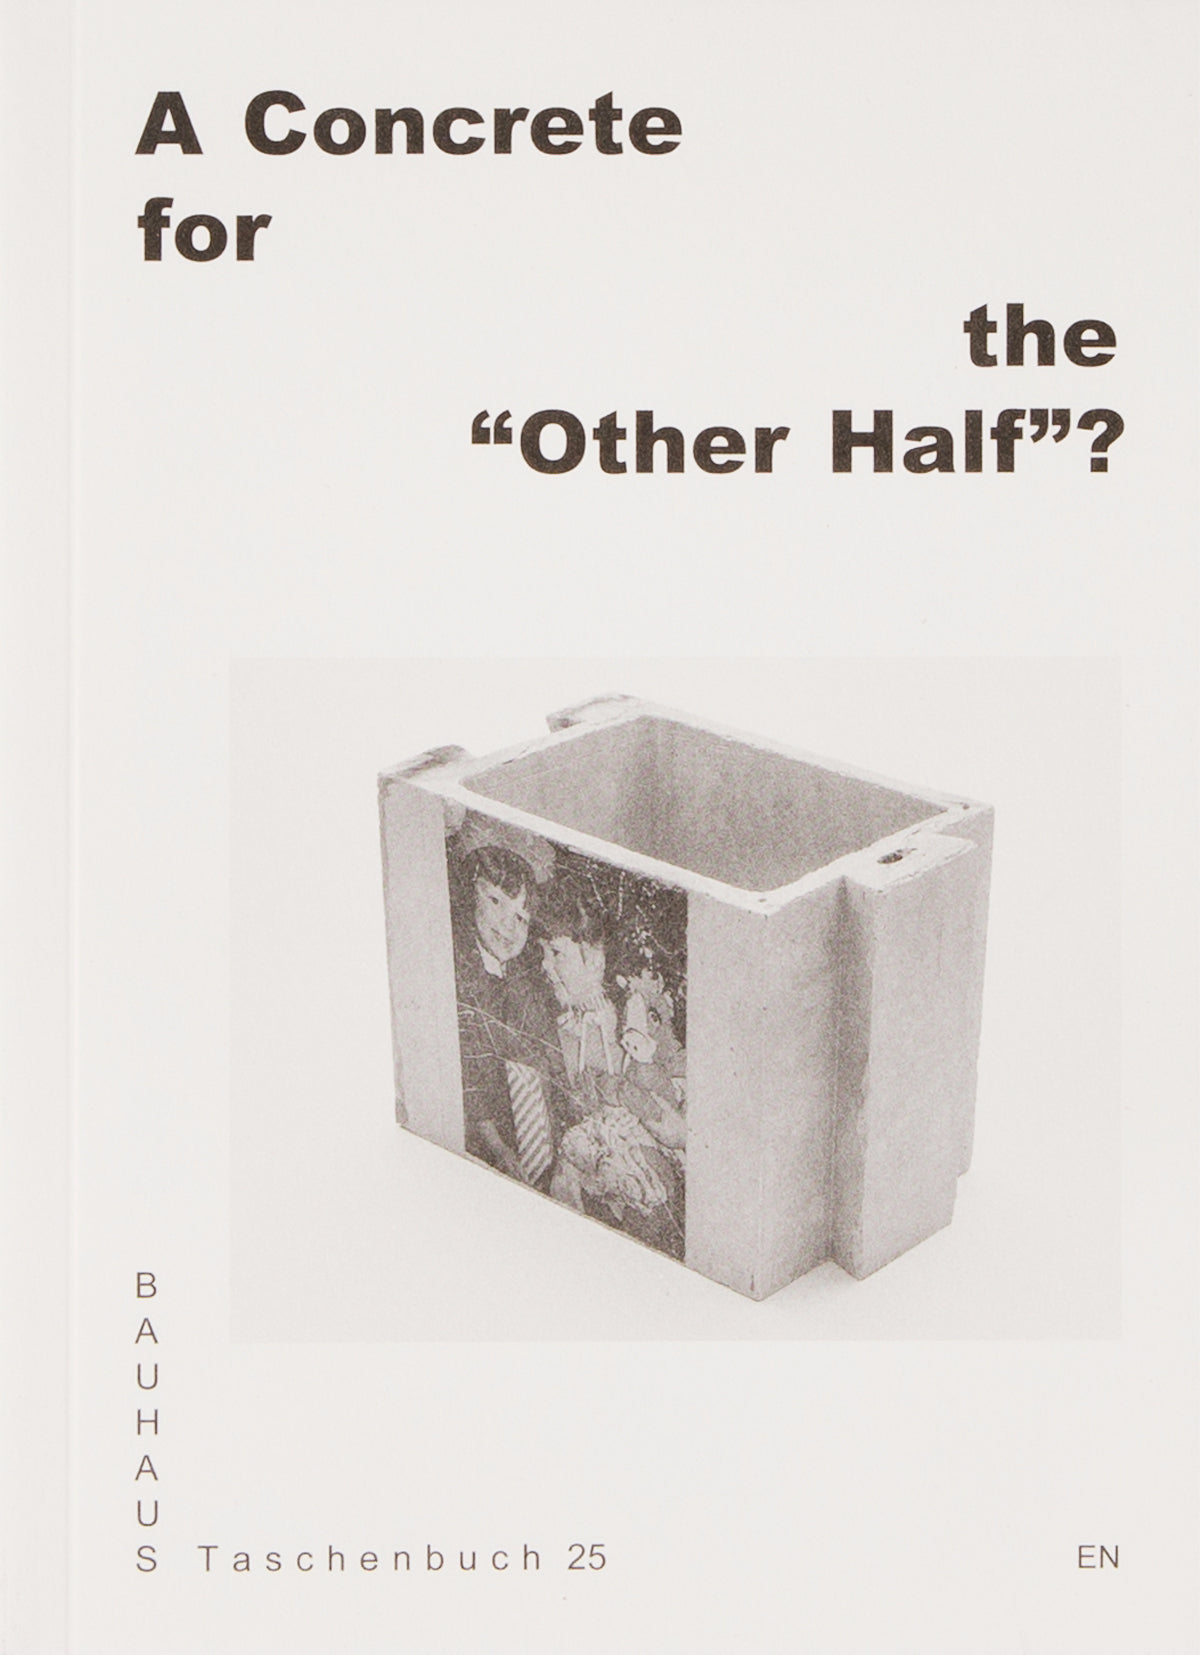 A Concrete for the “Other Half”?